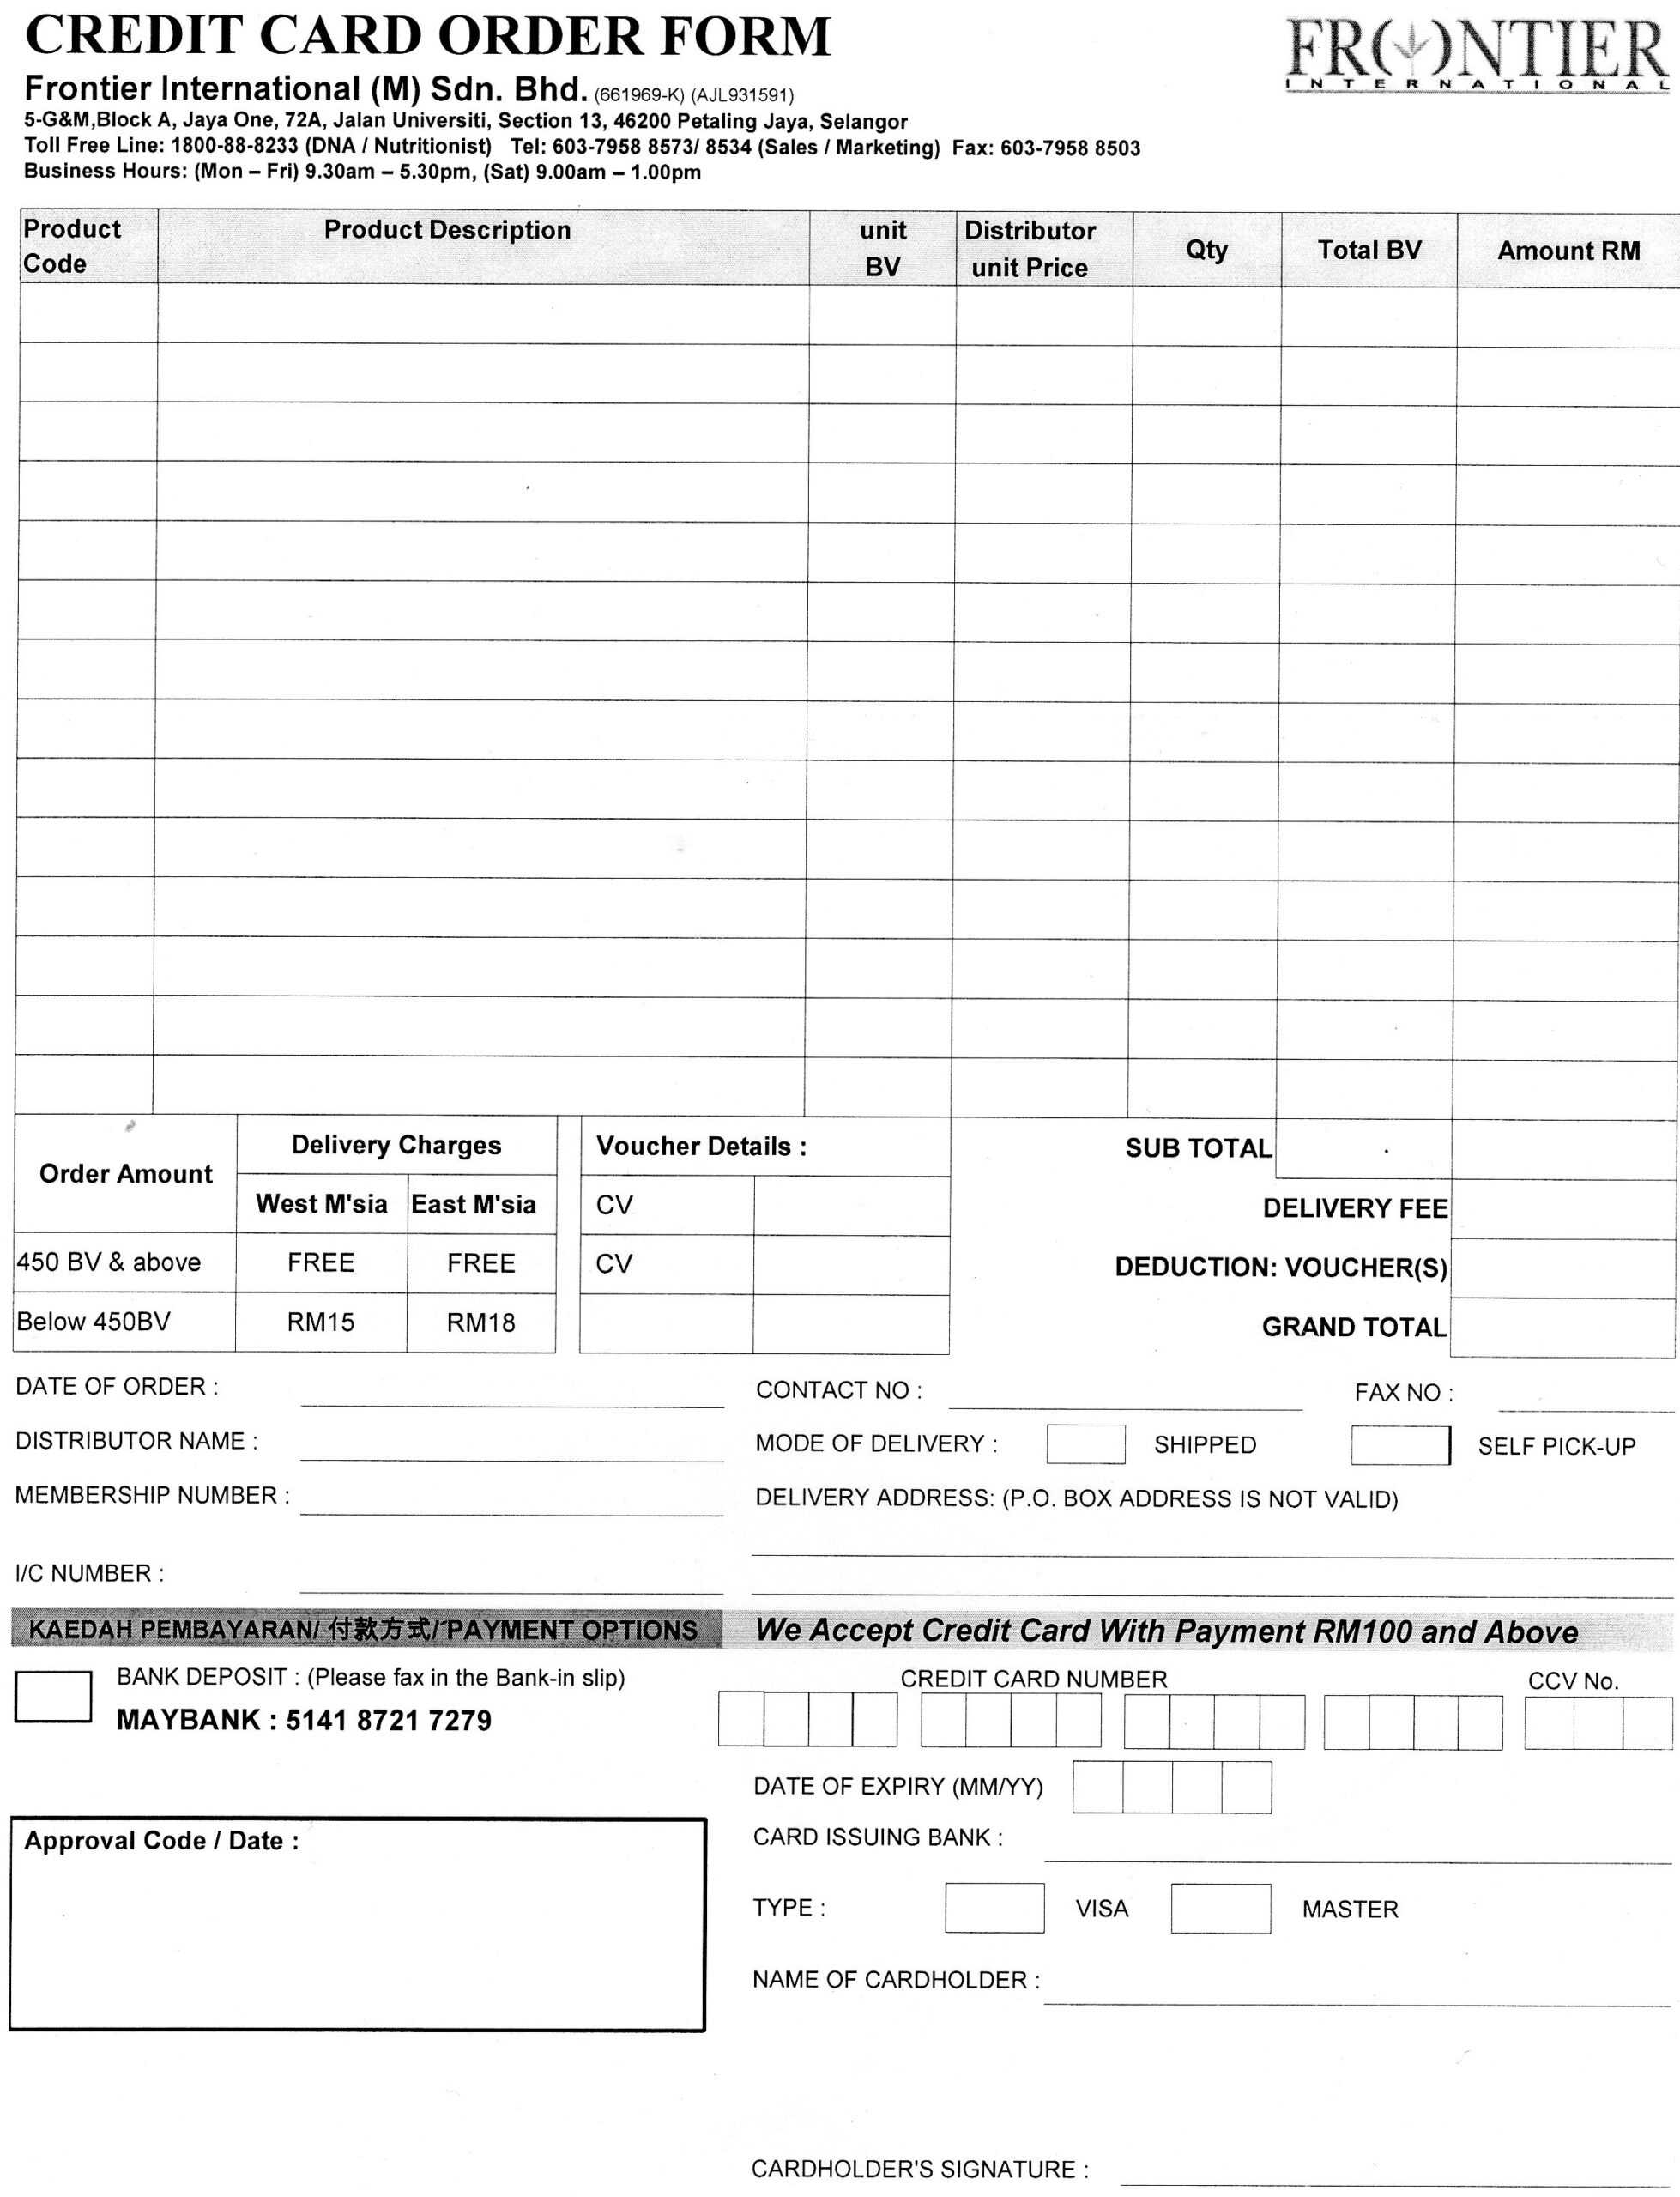 Credit Card Order Form | June Chan's Frontier Network Throughout Order Form With Credit Card Template